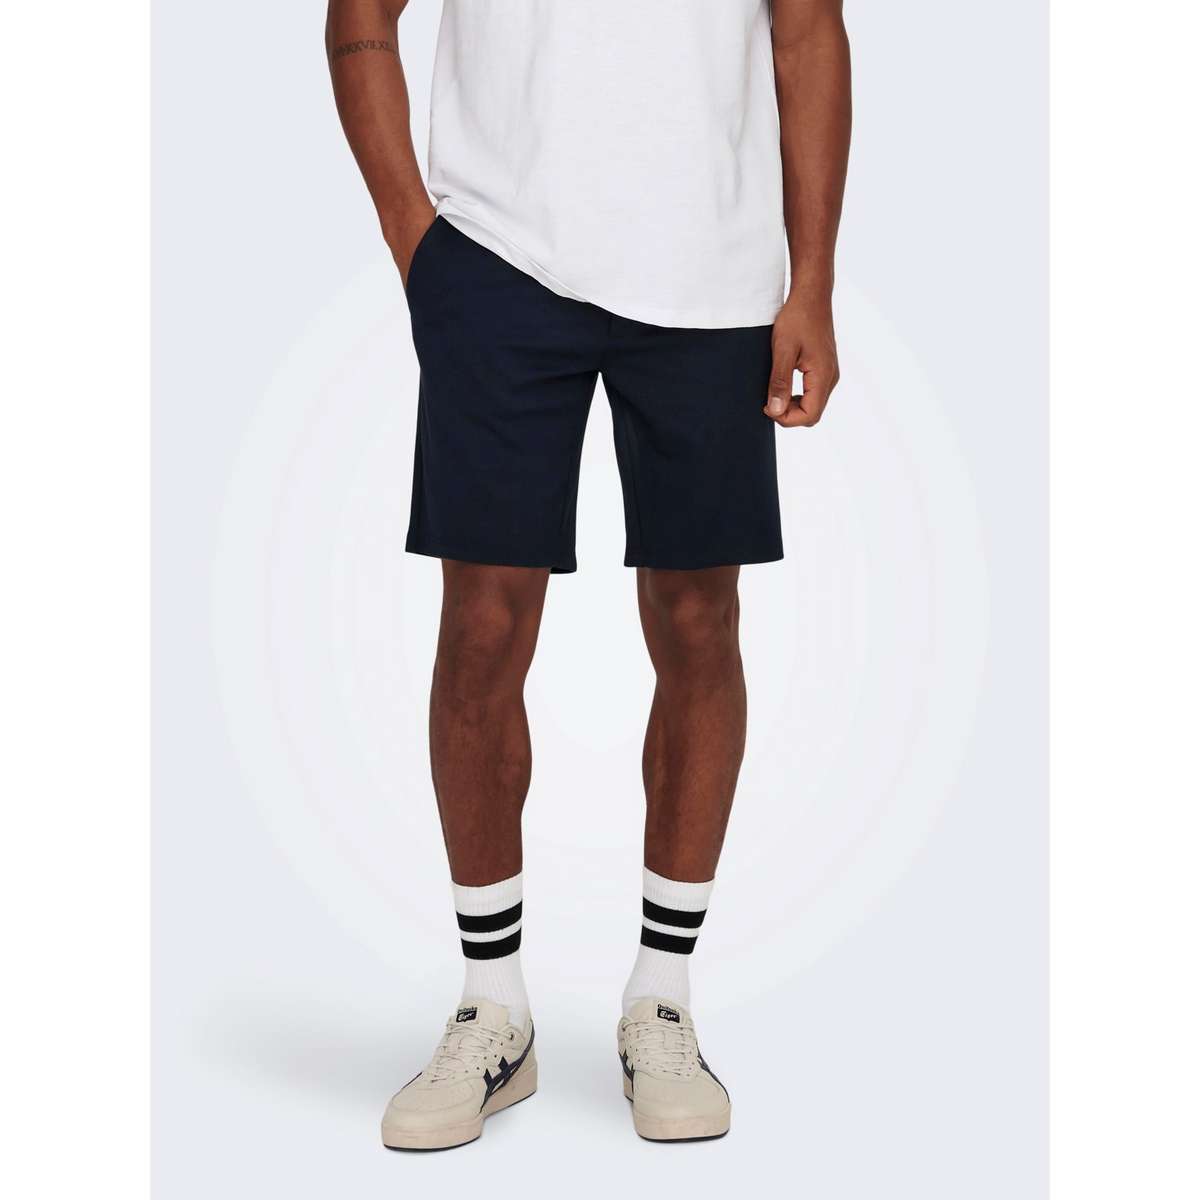 ONLY & SONS CHINO SHORTS BLUE 22018667 NIGHT SKY 